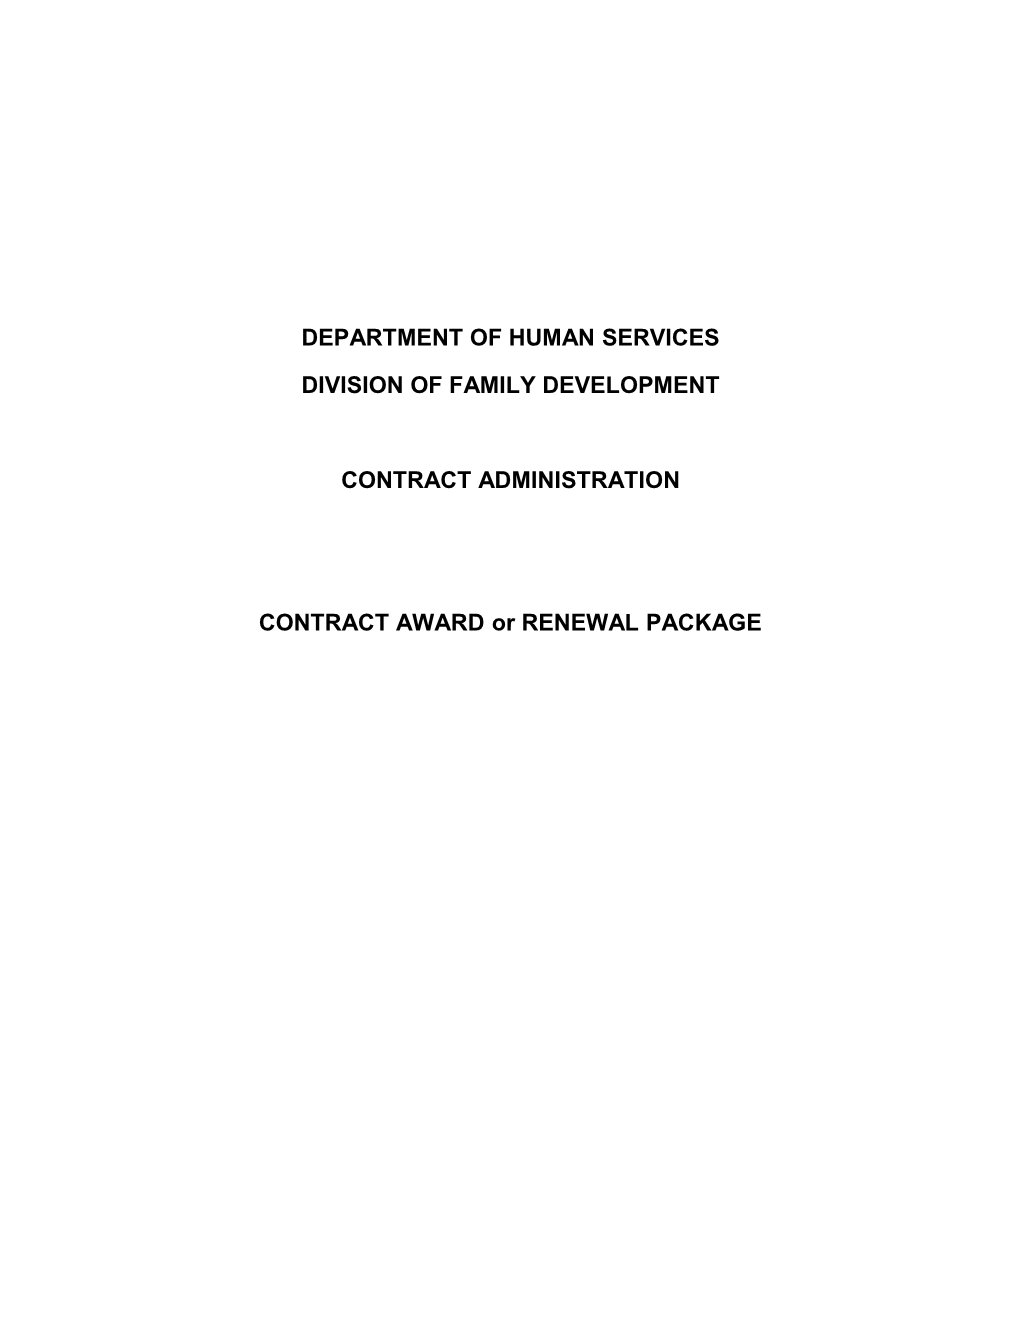 Department of Human Services s3